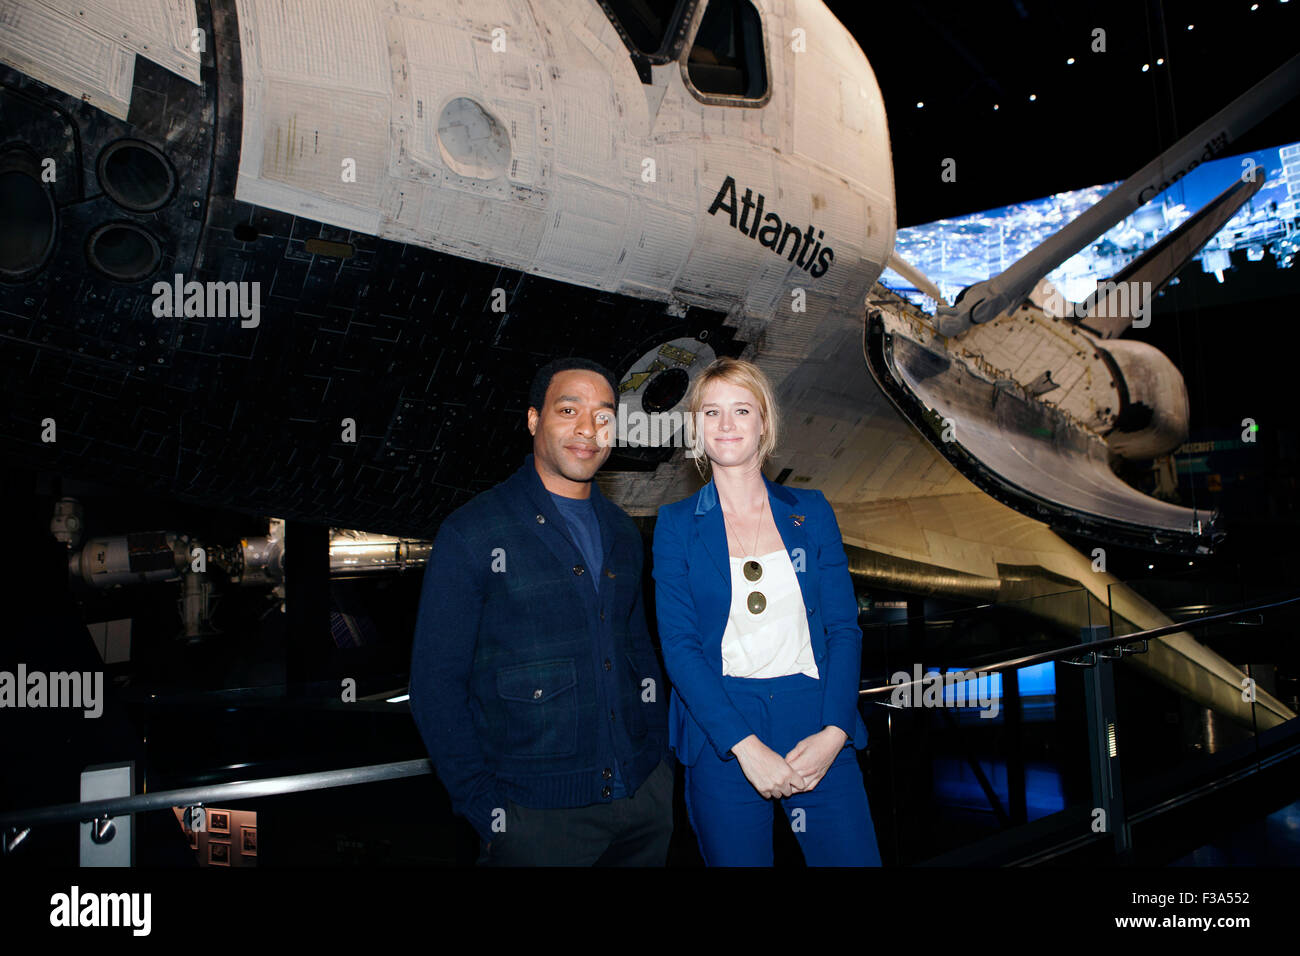 Actors Chiwetel Ejiofor and Mackenzie Davis pose for a photograph in front of Atlantis during a tour of Space Shuttle display at NASA's Kennedy Space Center Visitor Complex October 1, 2015 in Cape Canaveral, Florida. Ejiofor and Davis star in the movie The Martian. Stock Photo